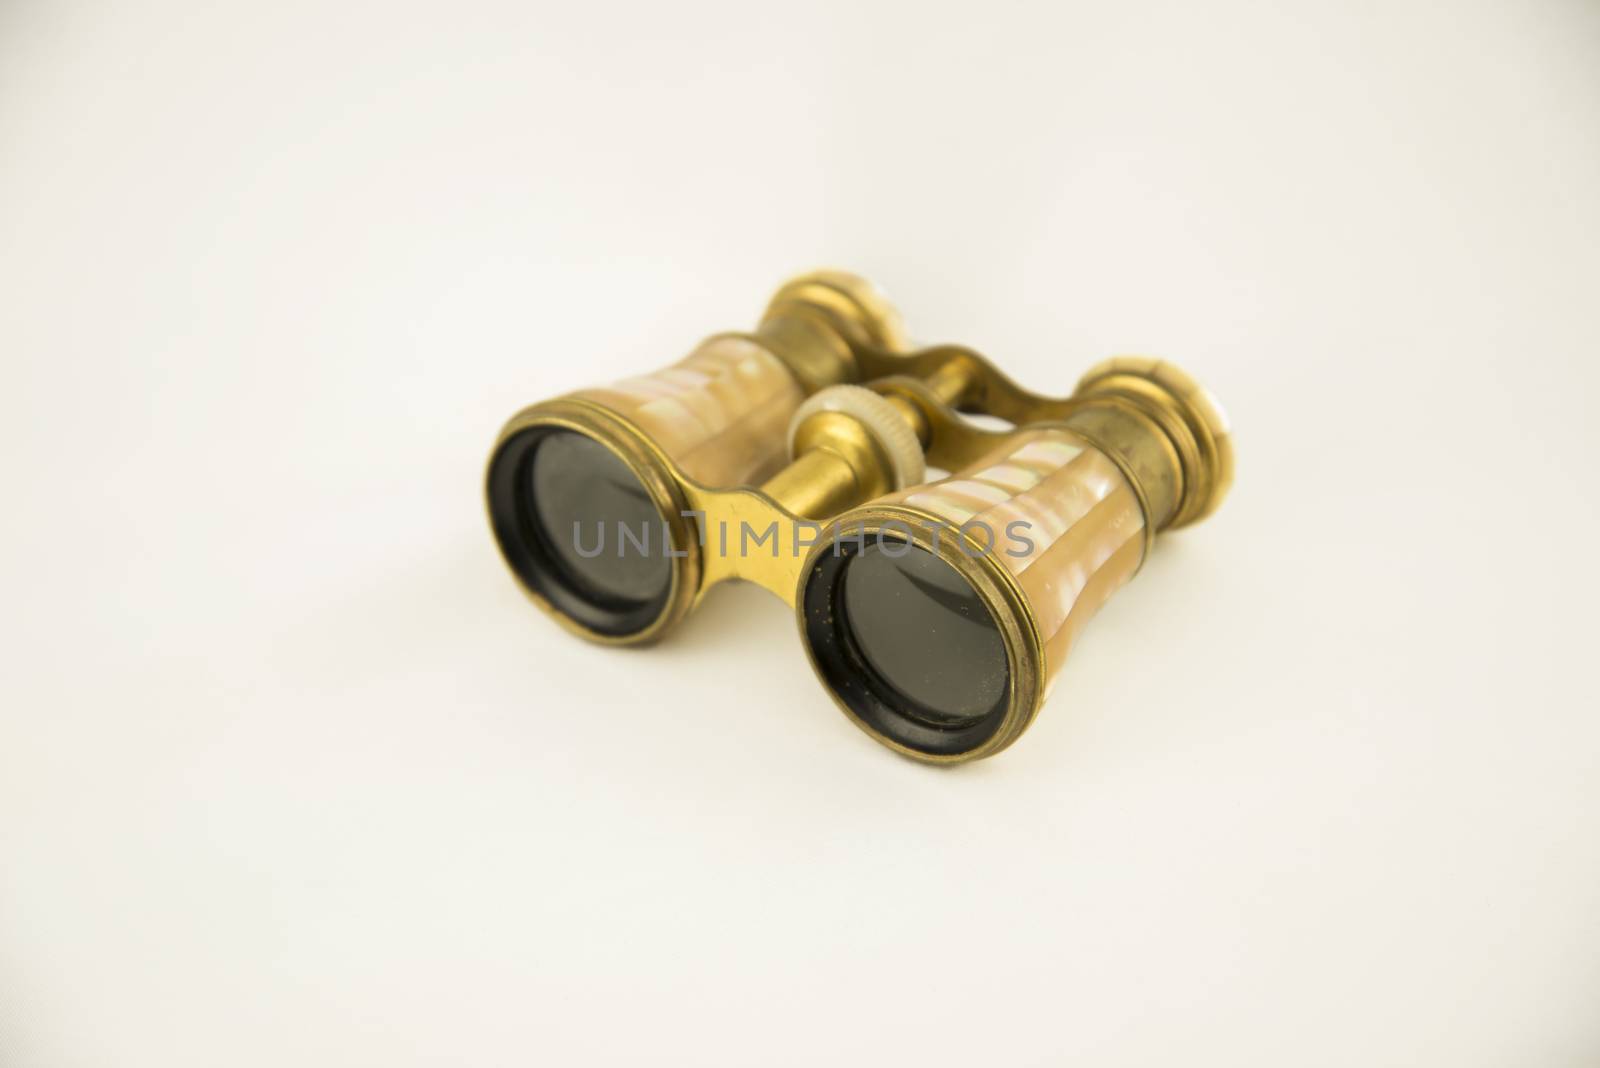 Old opera glasses isolated on a white background